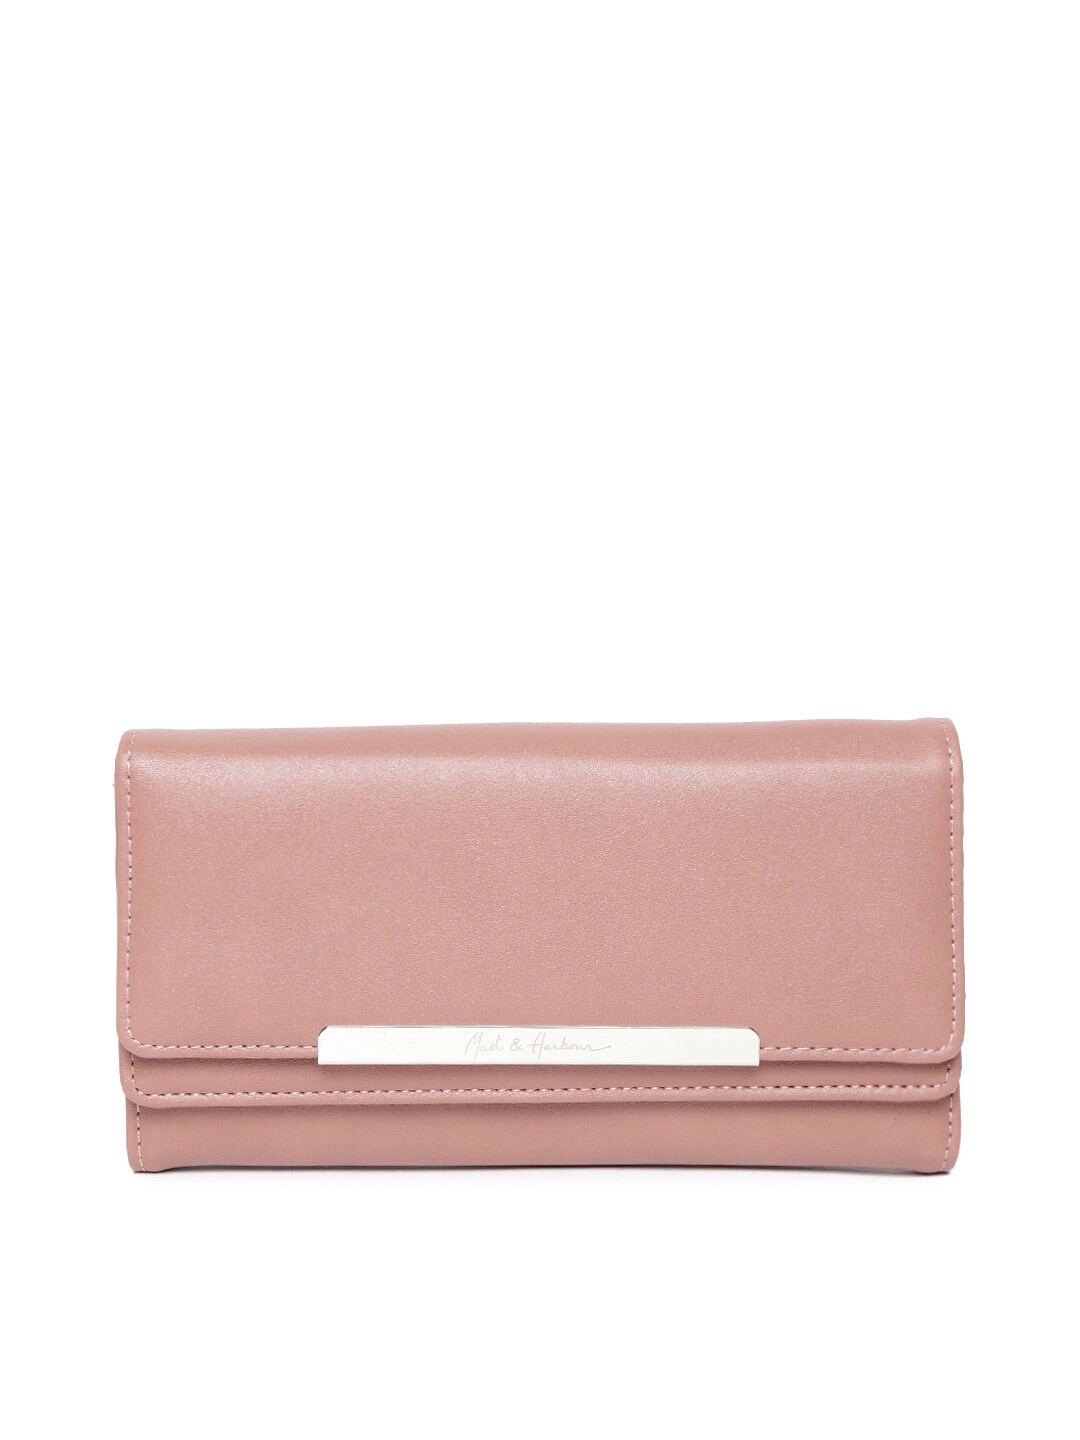 Mast & Harbour Women Dusty Pink Solid Three Fold Wallet Price in India